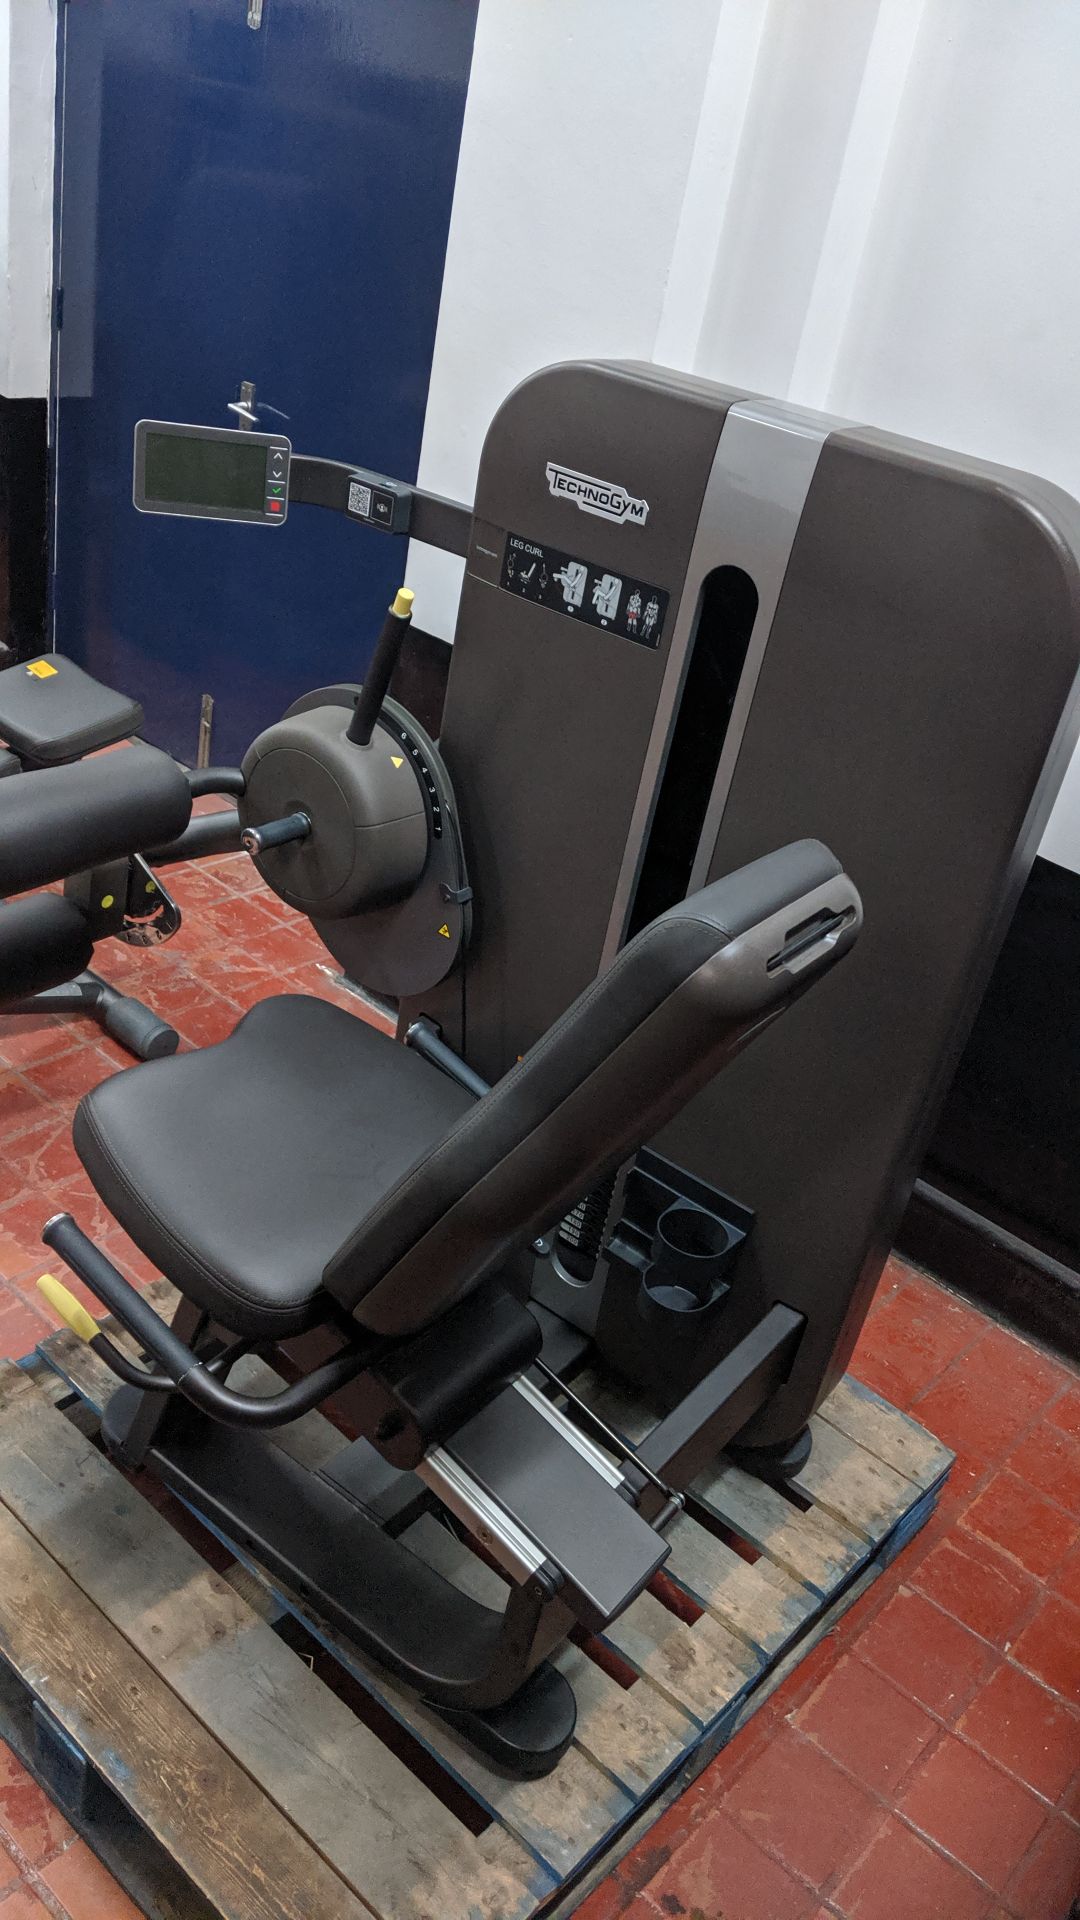 Technogym Leg Curl Artis Purchased new in 2016 - refurbished/recommissioned by Technogym - please - Image 6 of 9